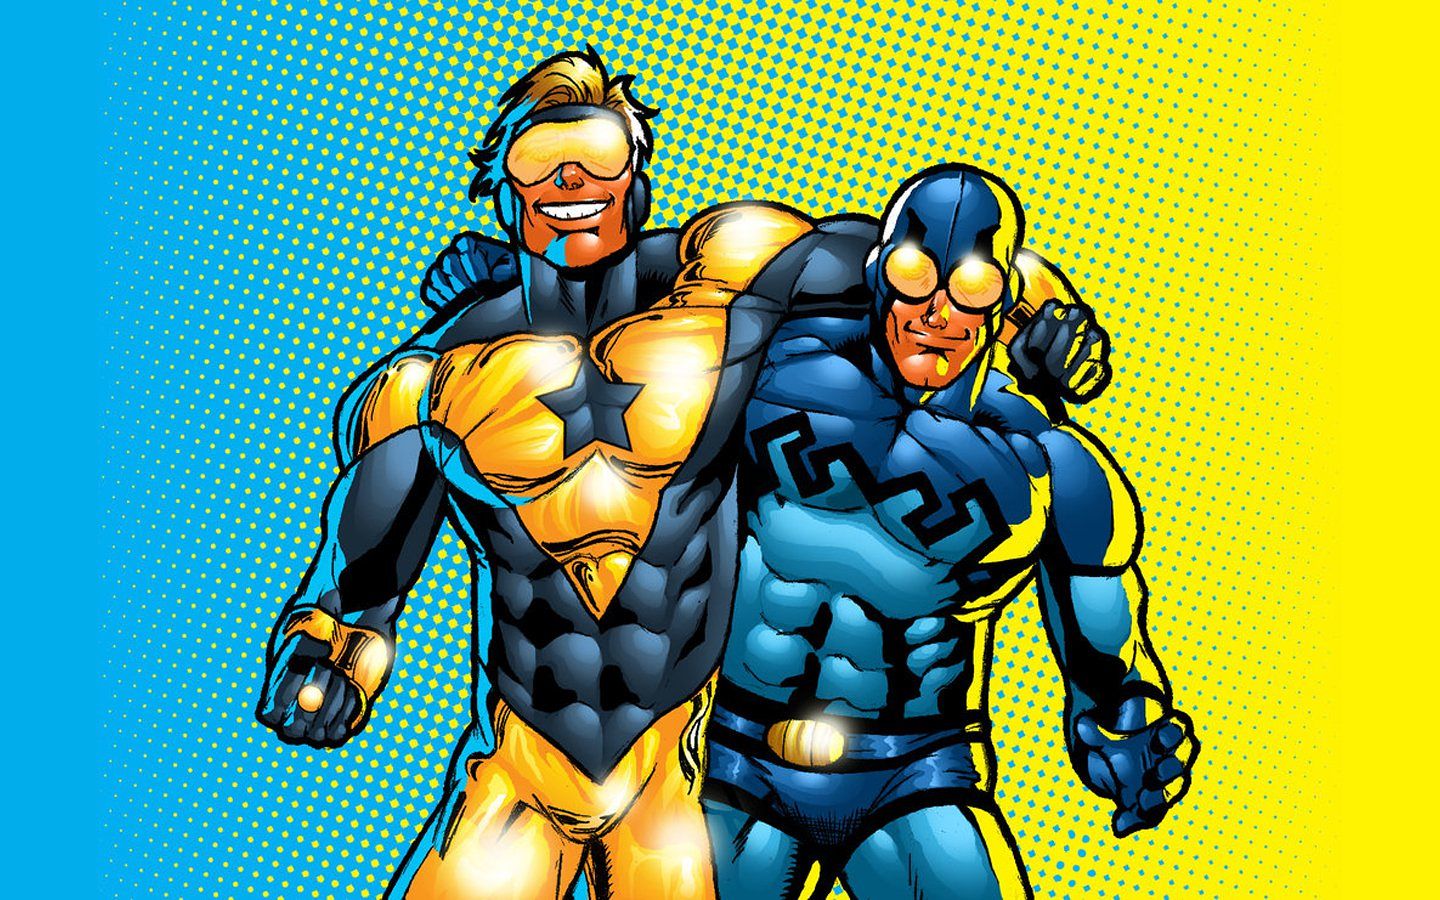 booster-gold-and-blue-beetle-movie-621561.jpg